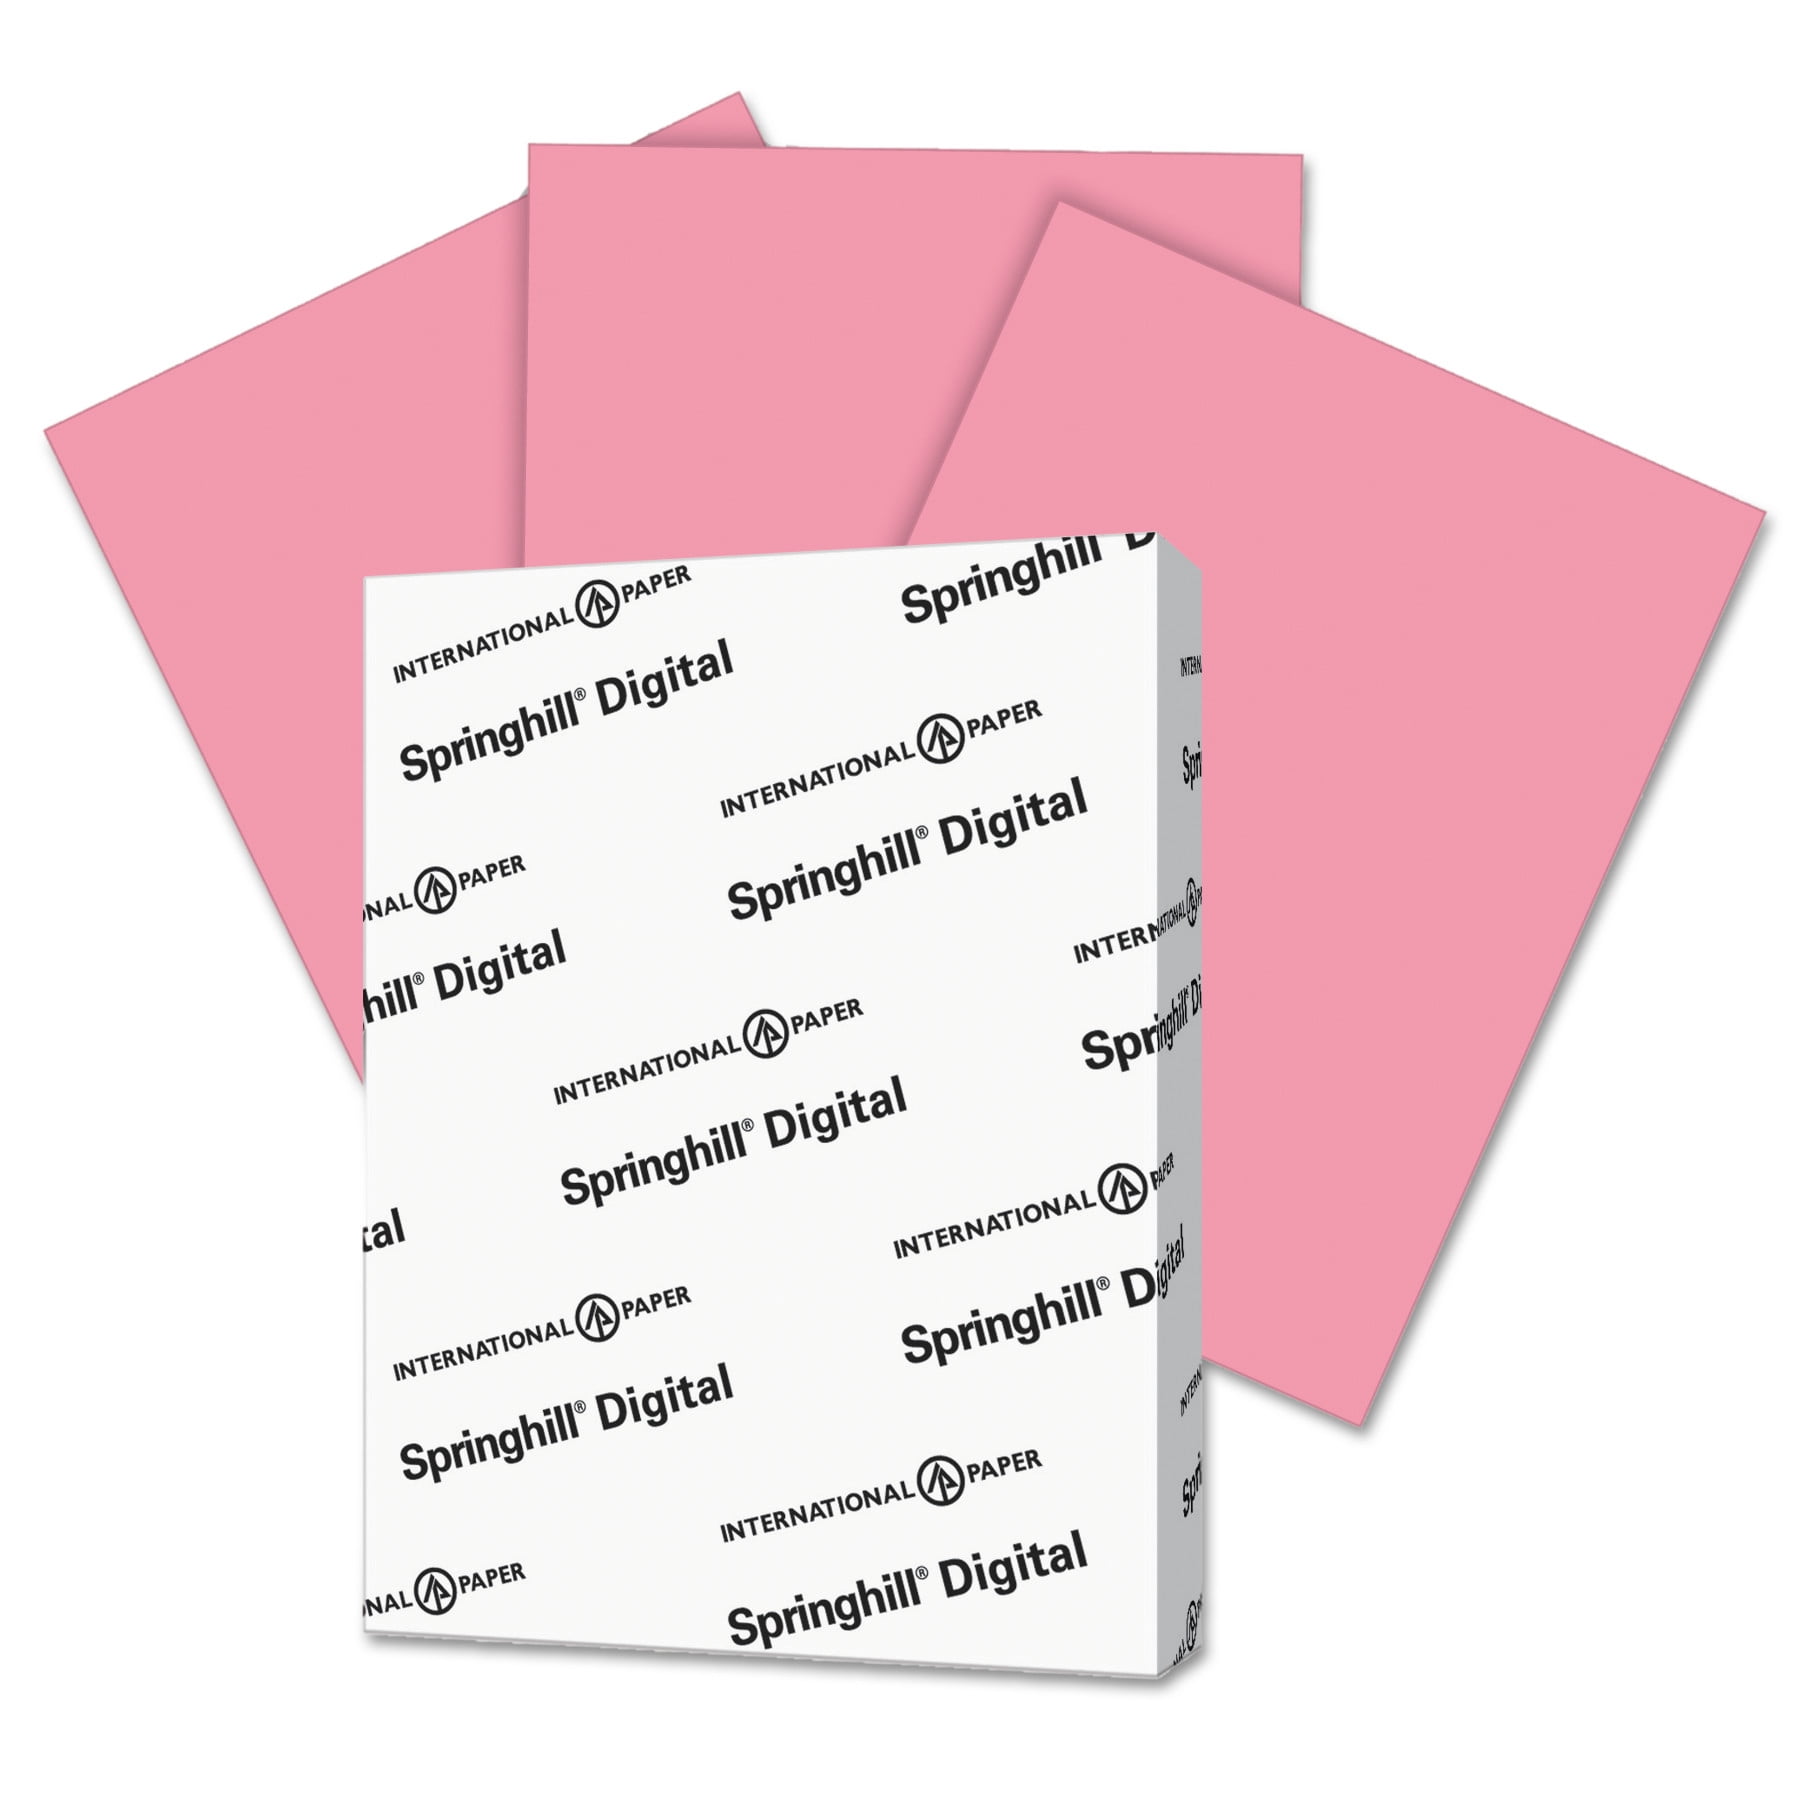 Springhill 015101 Digital Index White Card Stock 90 lb 8 1/2 x 11 250 Sheets/Pack 